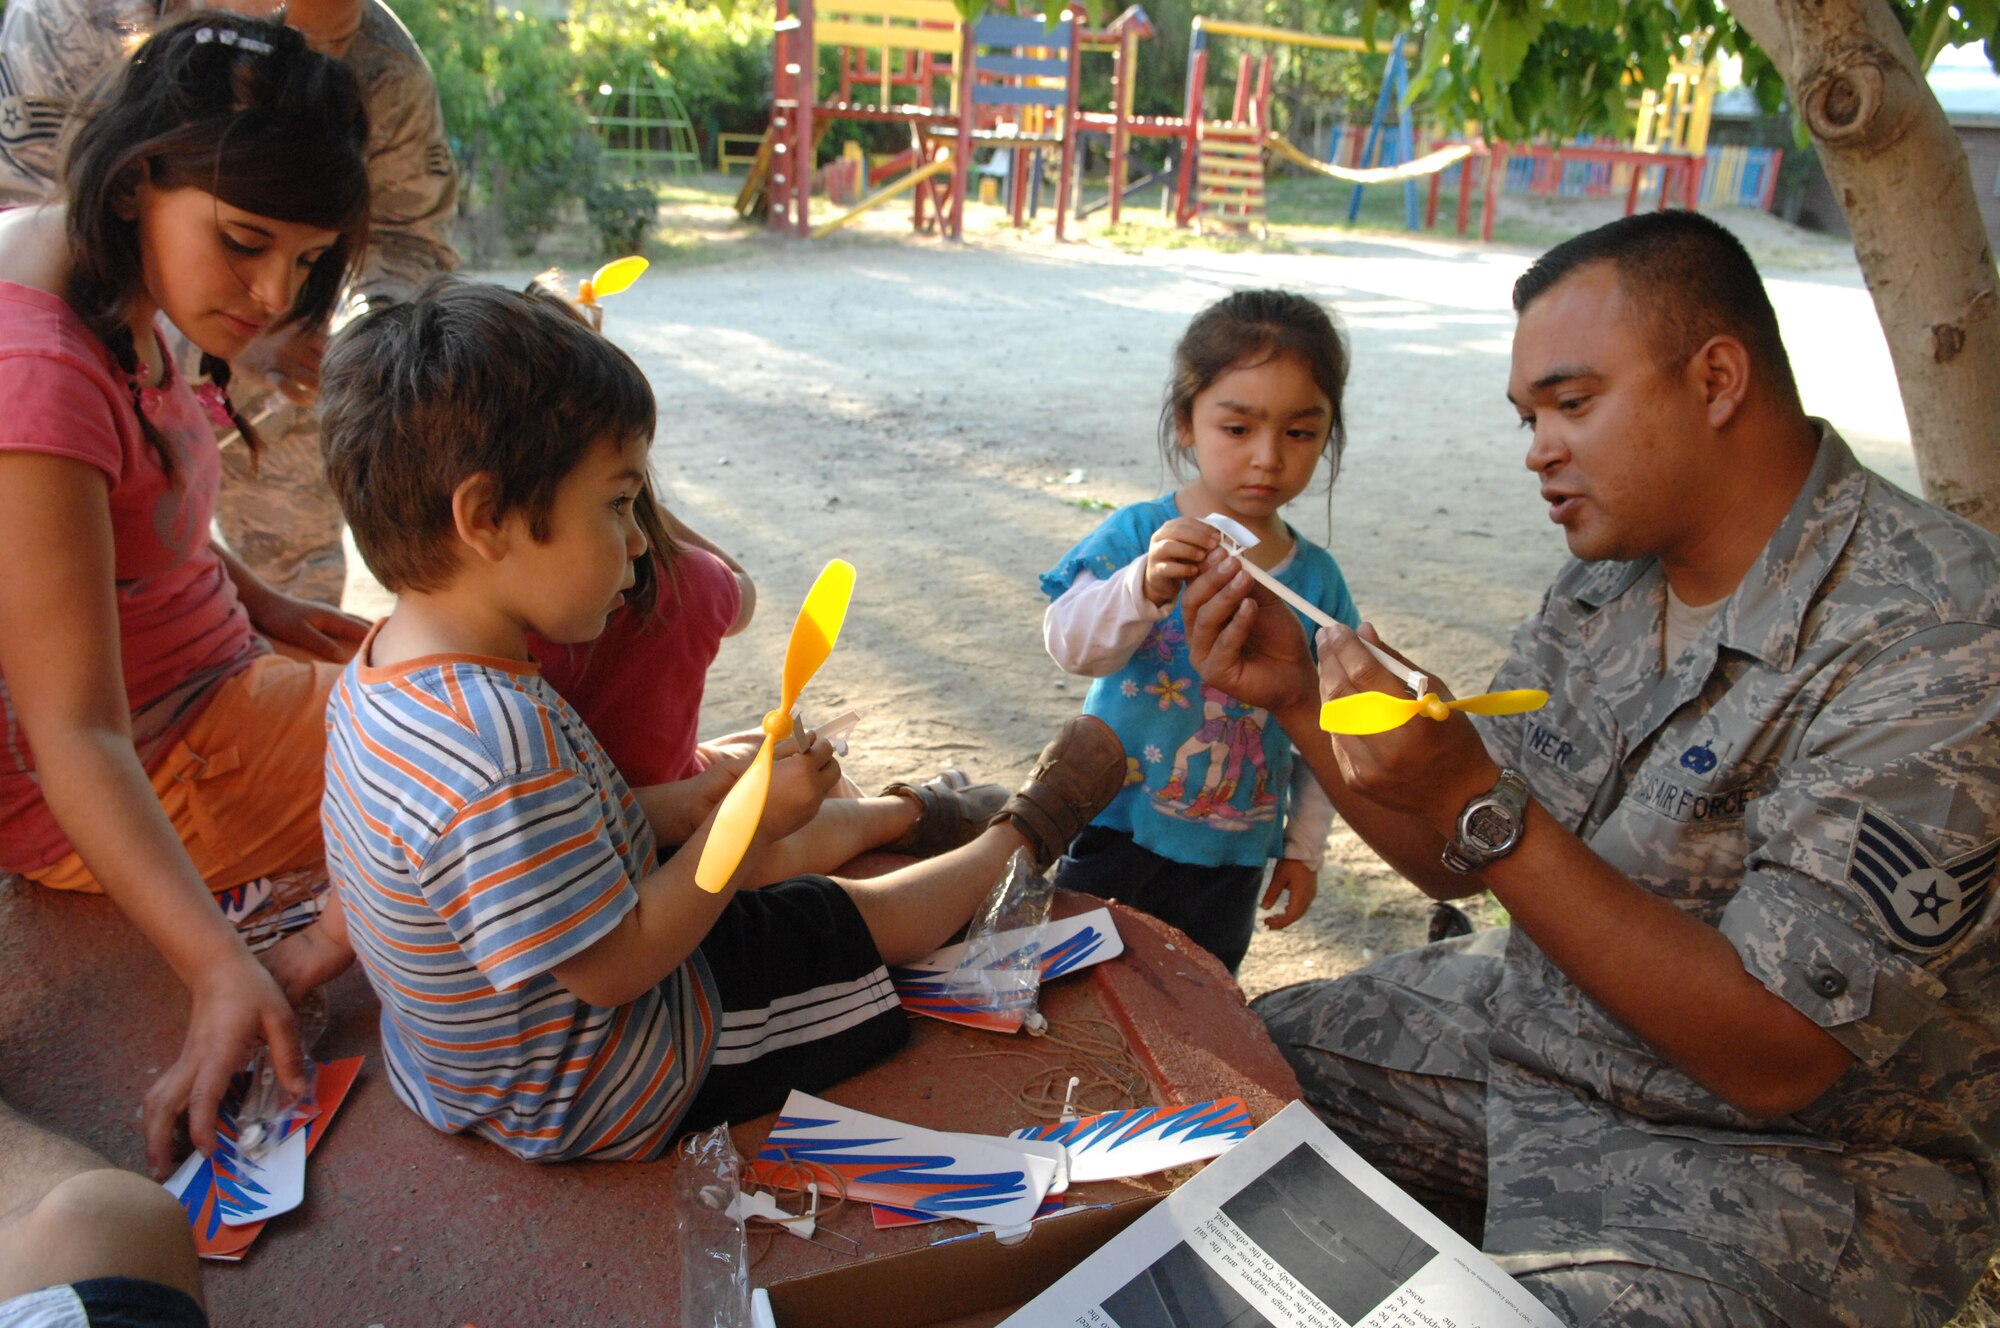 Staff Sgt. Lee Fortner, an aircraft maintainer from the 355th Maintenance Group at Davis Monthan Air Force Base, Ariz., demonstrates how to build a model airplane to orphans at a Santiago, Chile orphanage on Oct. 30. Sergeant Fortner is one of about 70 Airmen spread across four South American countries learning and sharing with their partner nations' military members and performing community outreach events as part of Operation Southern Partner -- a Twelfth Air Force (Air Forces Southern) led event aimed at providing intensive, periodic subject-matter exchanges in the U.S. Southern Command area of focus. (Air Force photo/Tech. Sgt. Roy Santana)